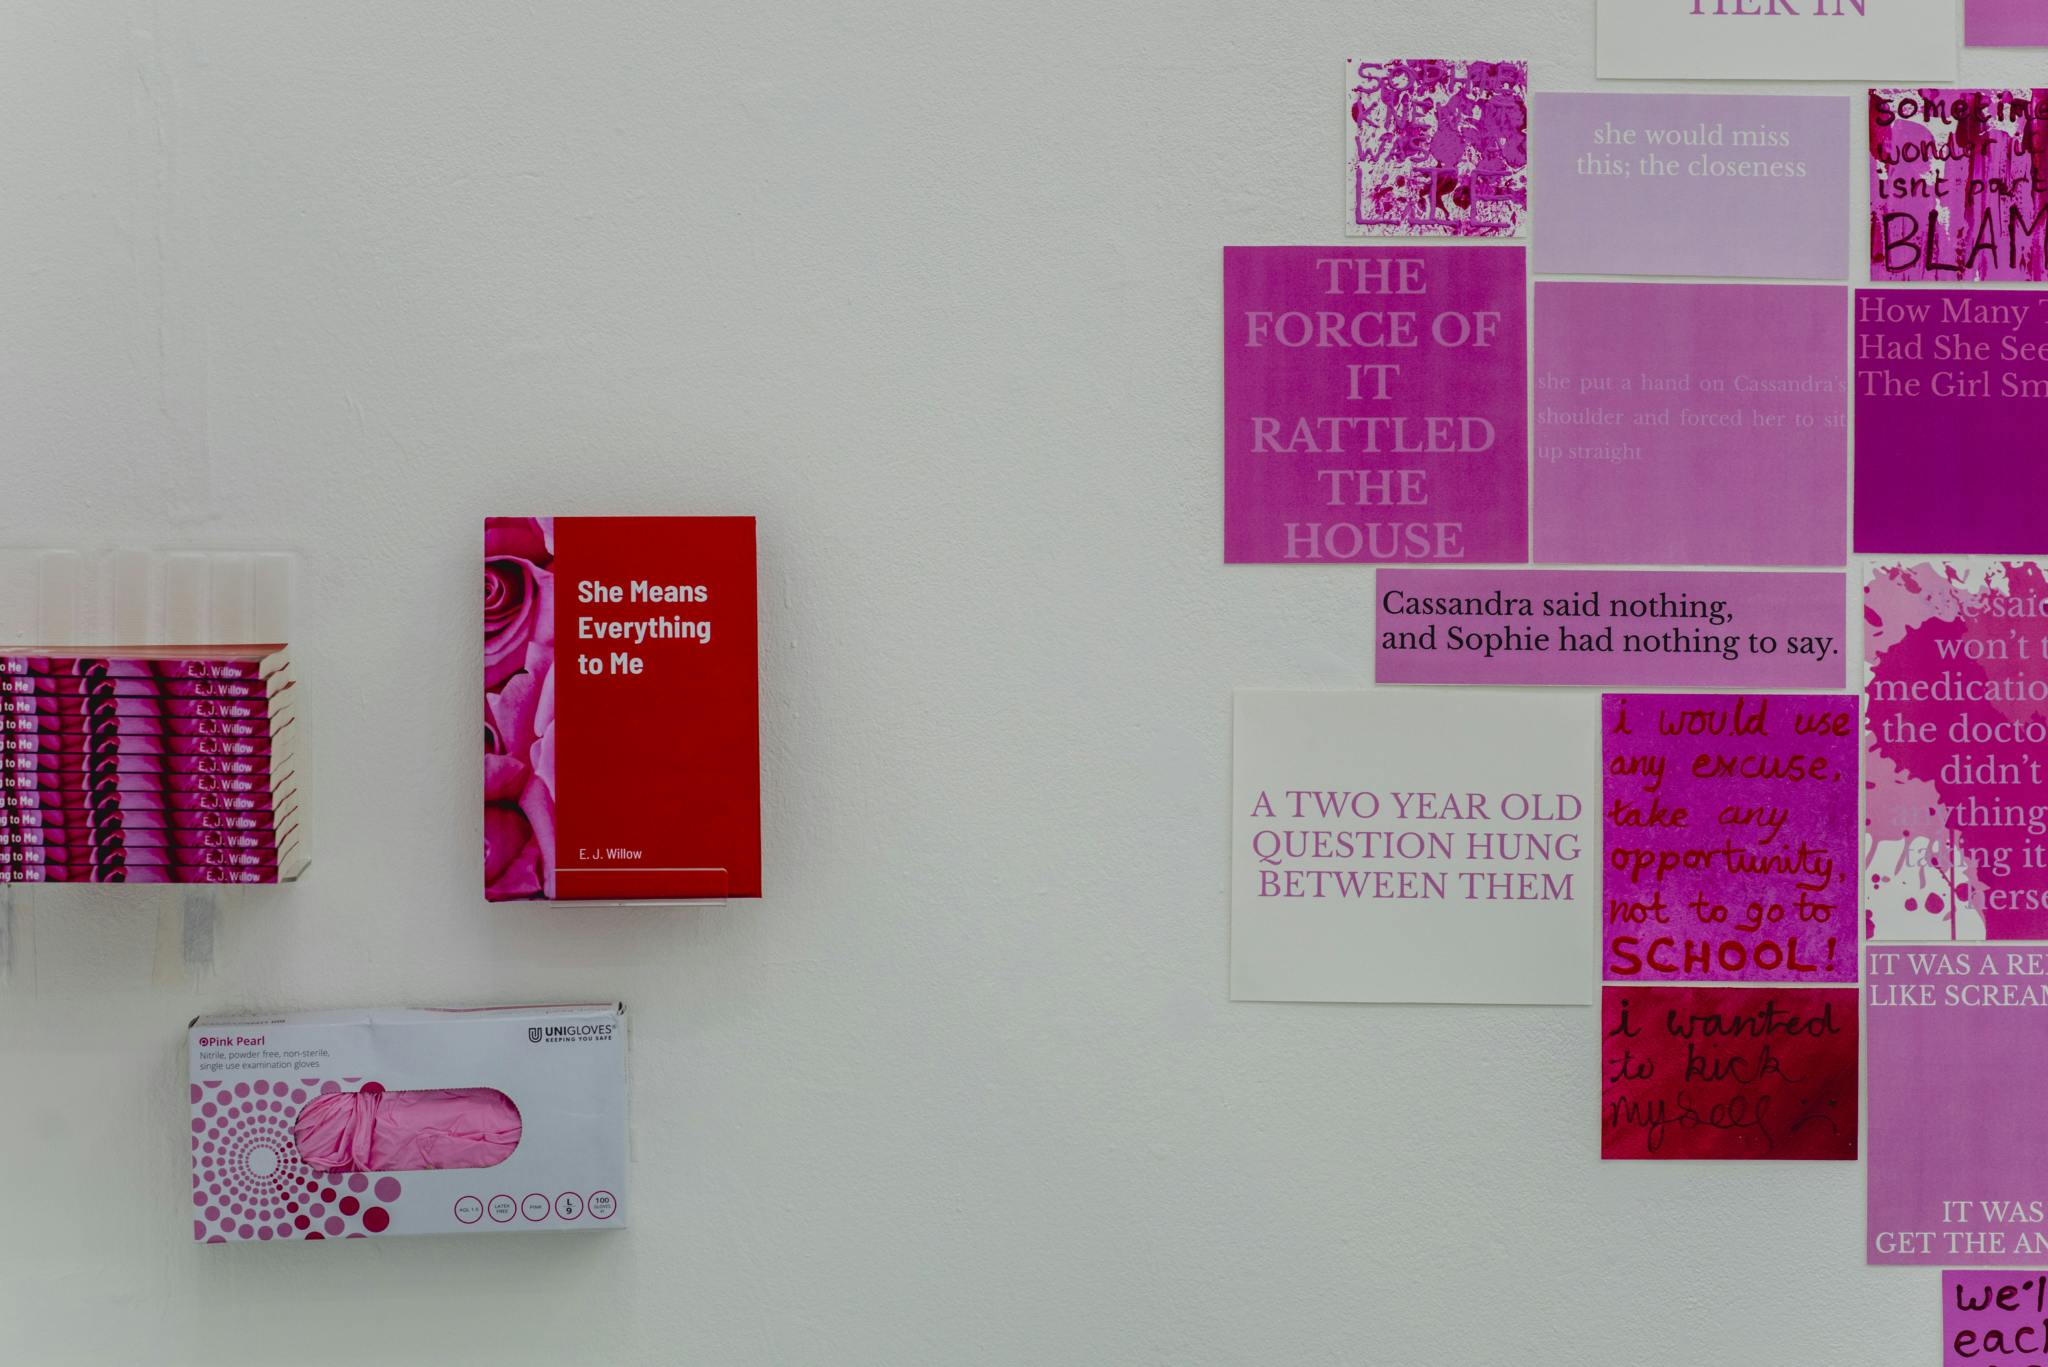 Image shows a wall with a number of pink images and quotes on it and to the left there is a book and several copies as well as some pink gloves